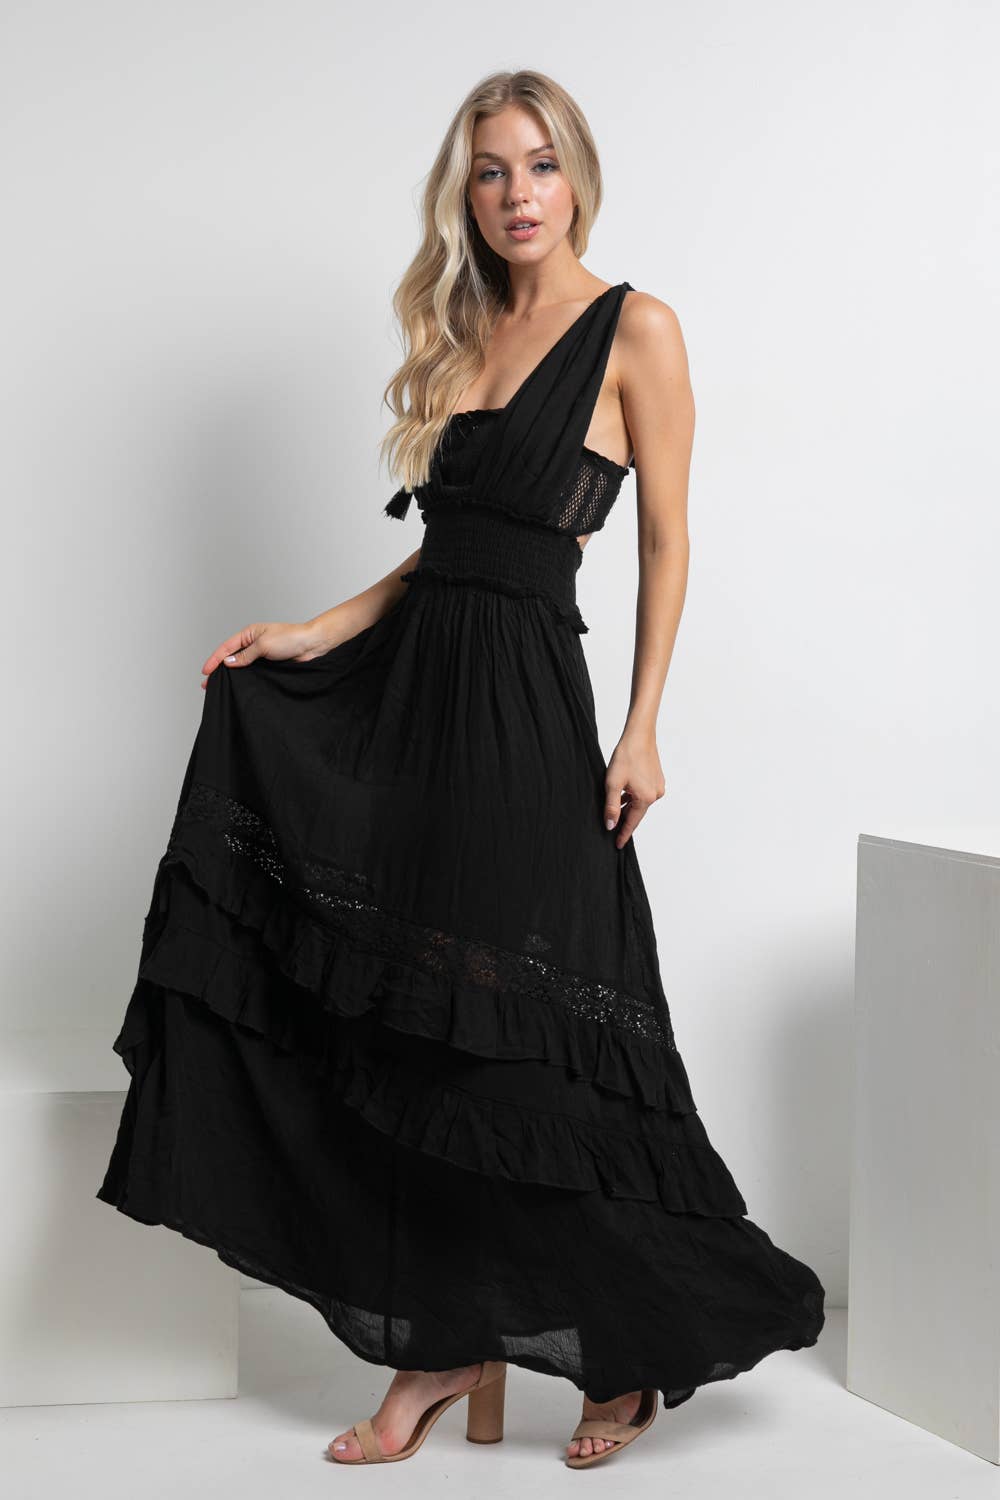 Crinkle Rayon Maxi Dress: Versatile and stylish maxi dress with smocked waist, inner tube top detail, and tassel ties. Crinkle rayon fabric offers a relaxed drape, making it perfect for various occasions. Lined for comfort and coverage. A trendy addition to your wardrobe.